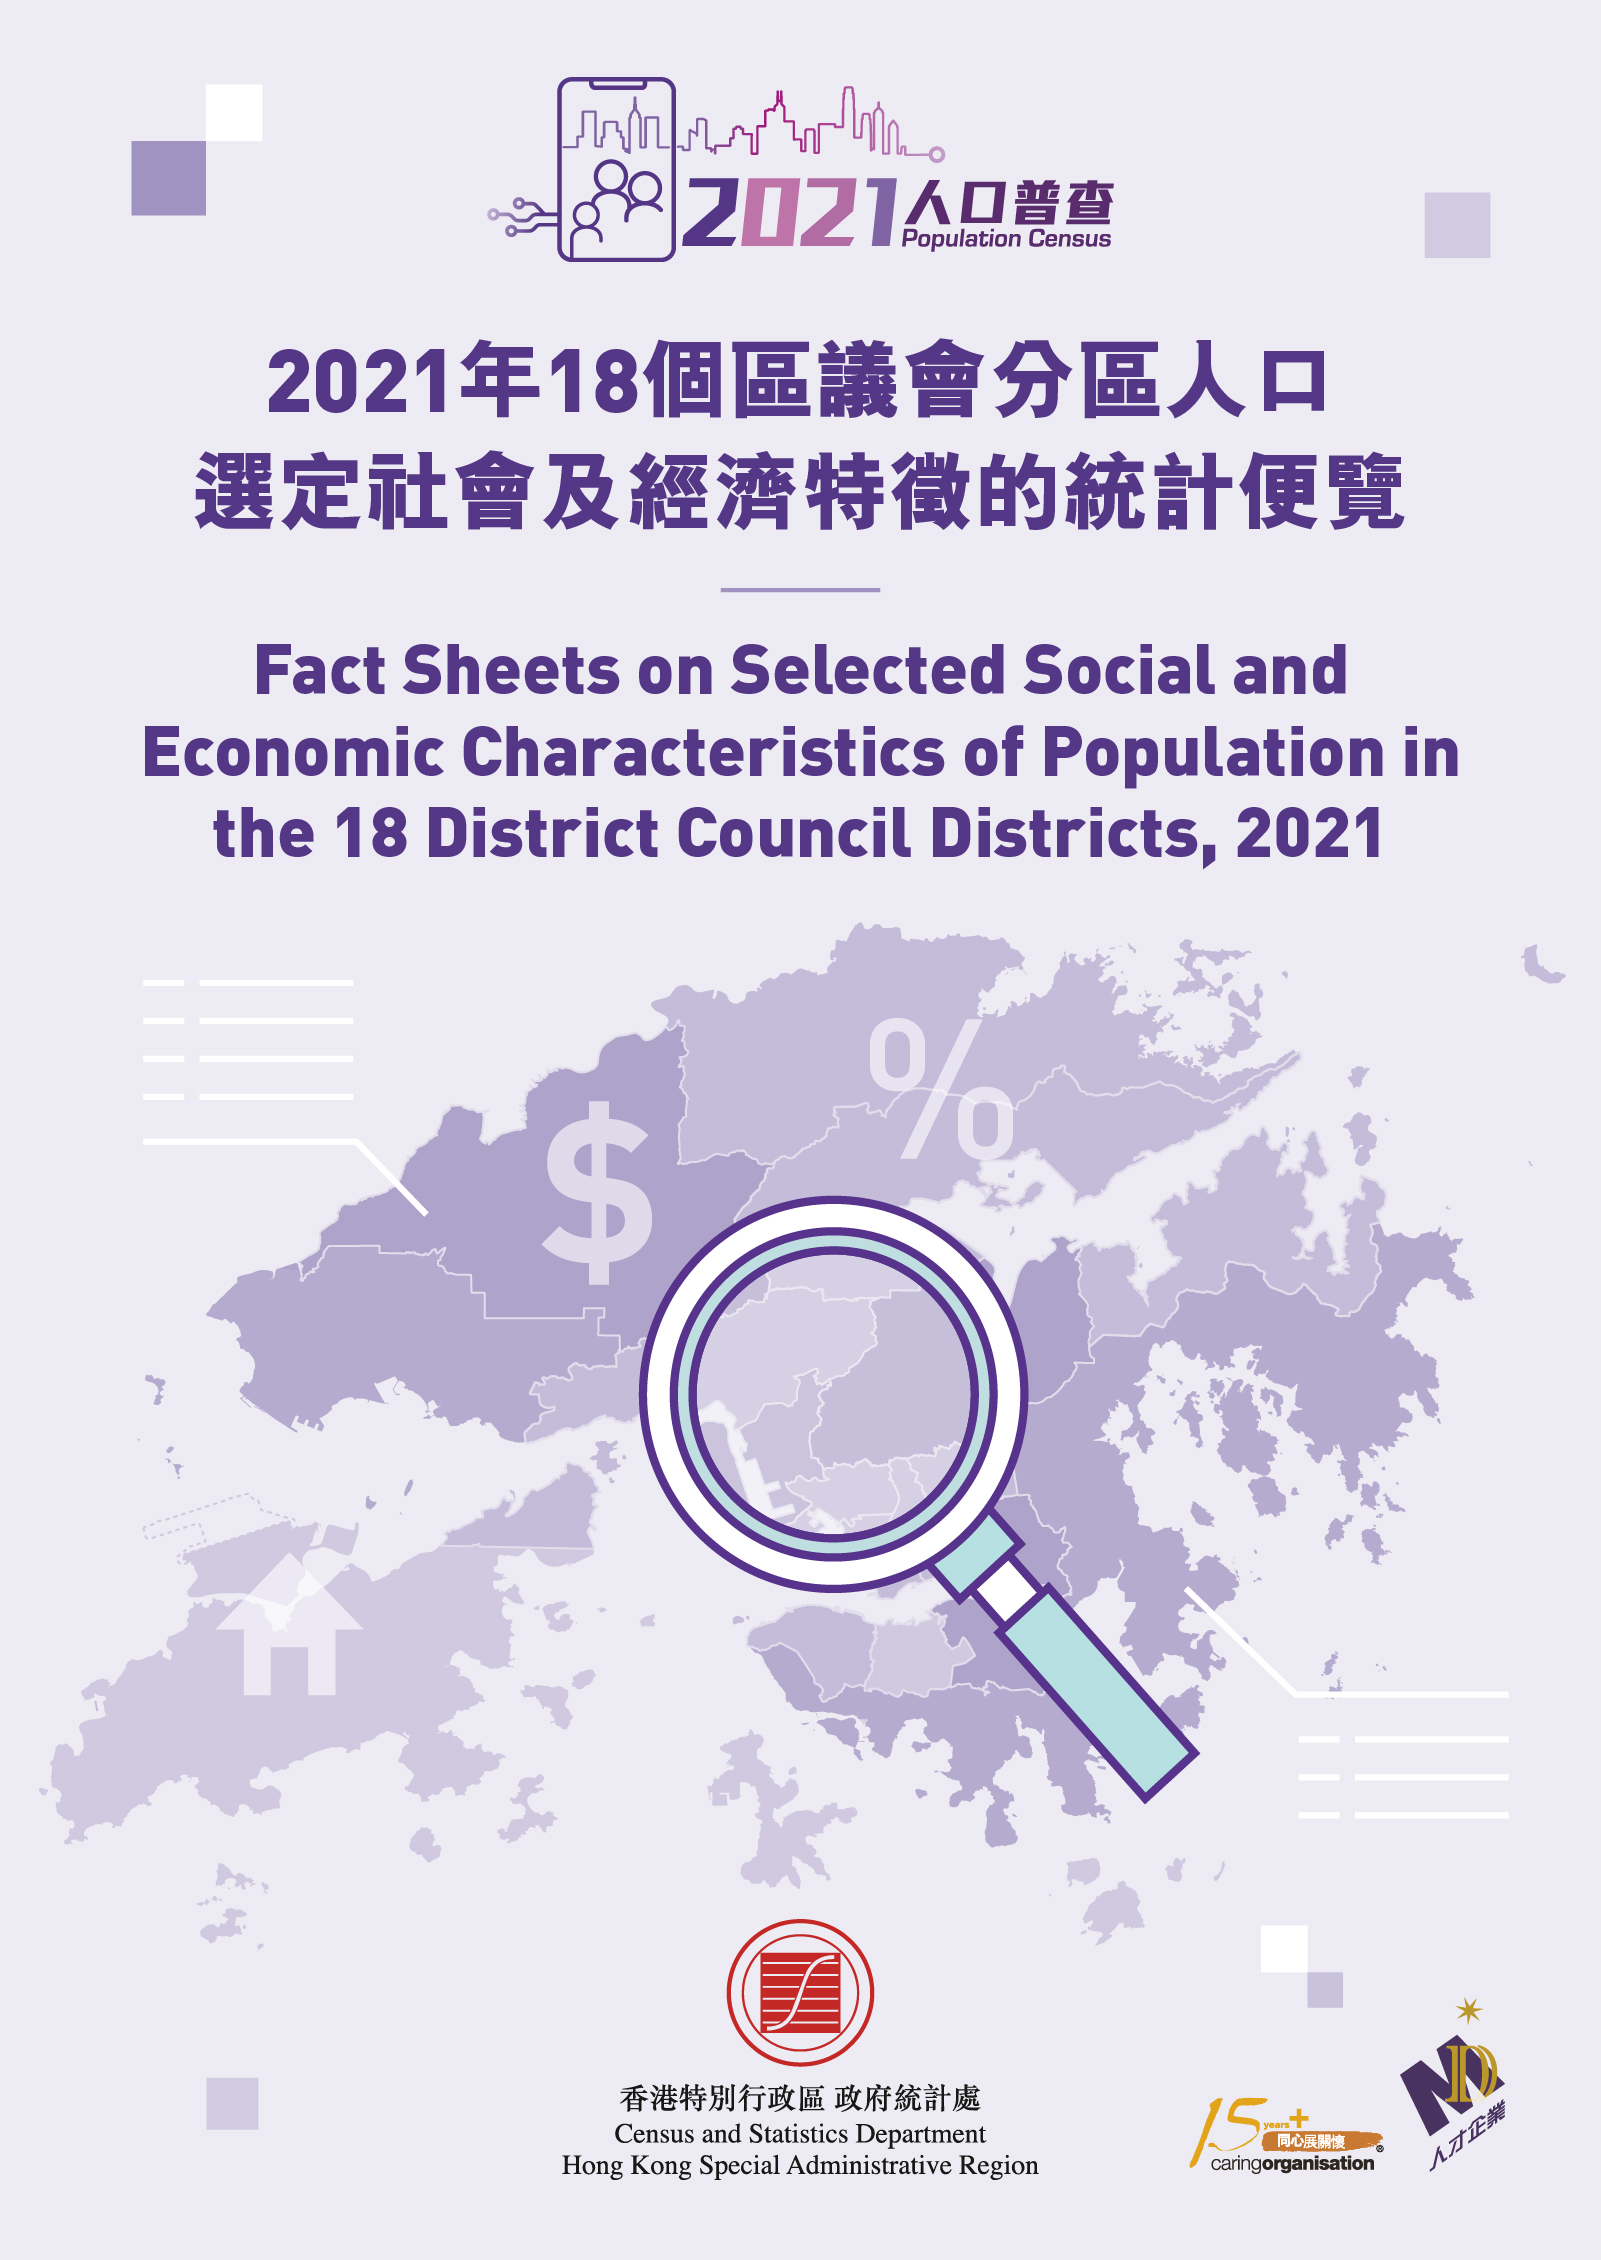 The statistics in this dashboard can also be obtained from “2021 Population Census – Summary Results”, which can be downloaded from the thematic website of the 2021 Population Census (www.census2021.gov.hk/en/publications.html).